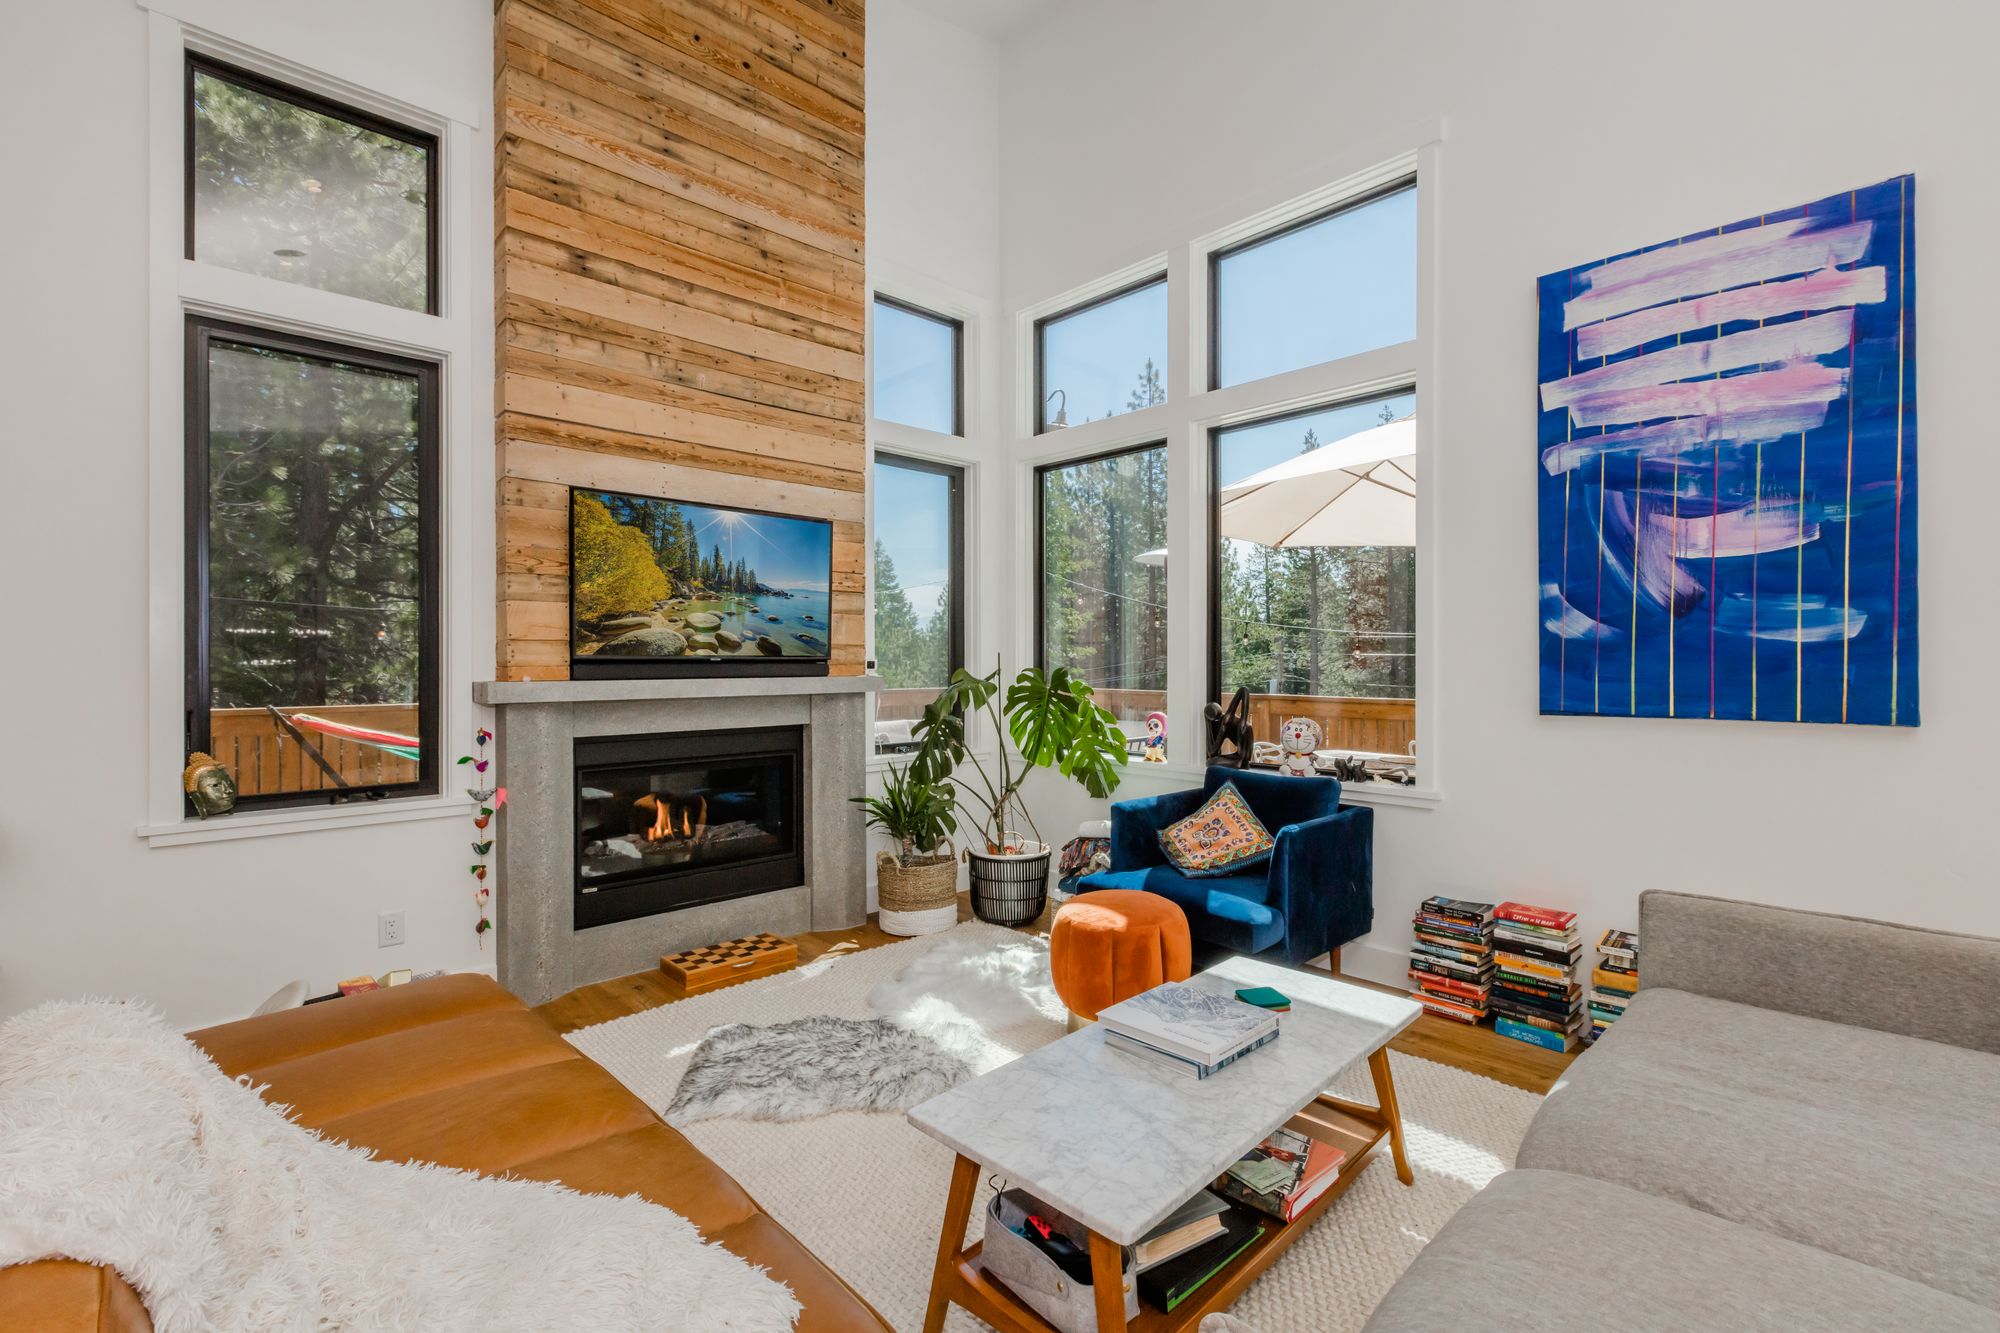 Spacious and sunny living room in a Truckee home with modern décor, featuring a stone fireplace, large windows.